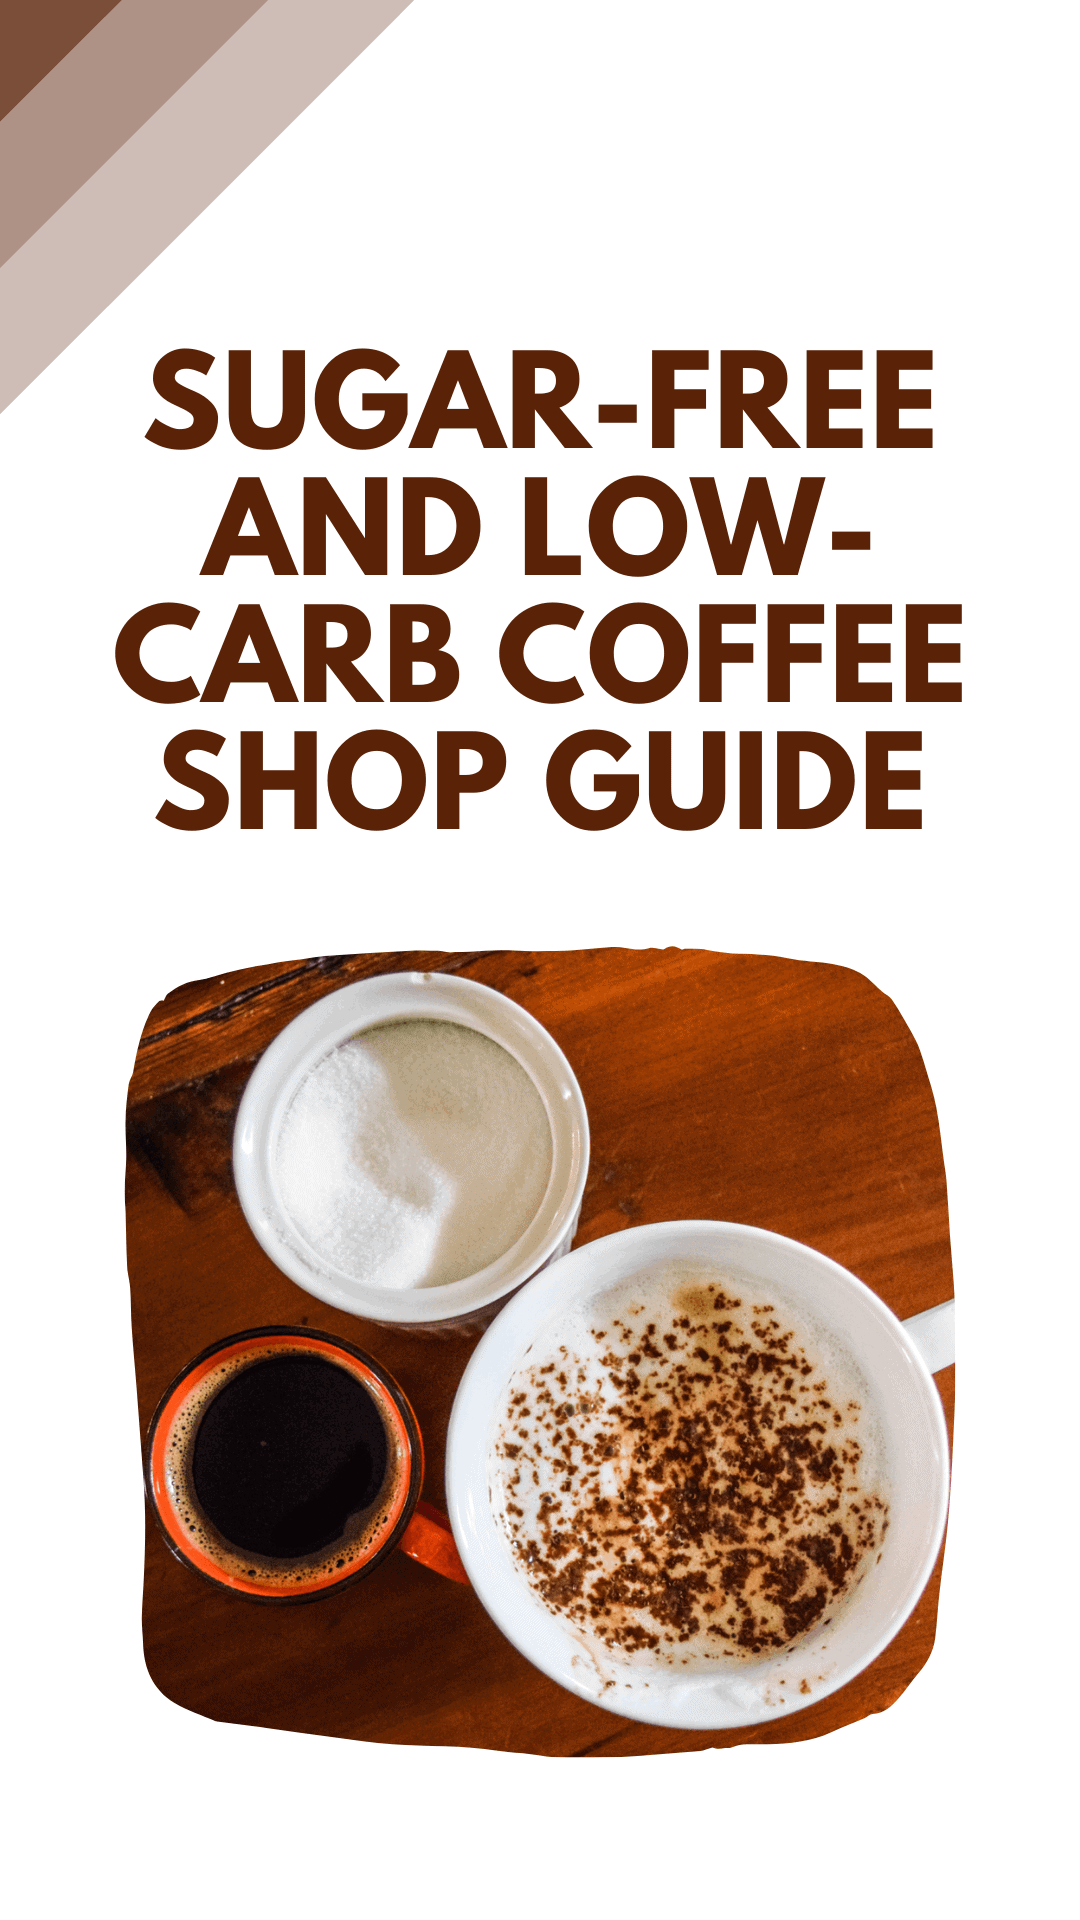 Text: Sugar-free and low-carb coffee shop guide. Image: Coffee and sugar.